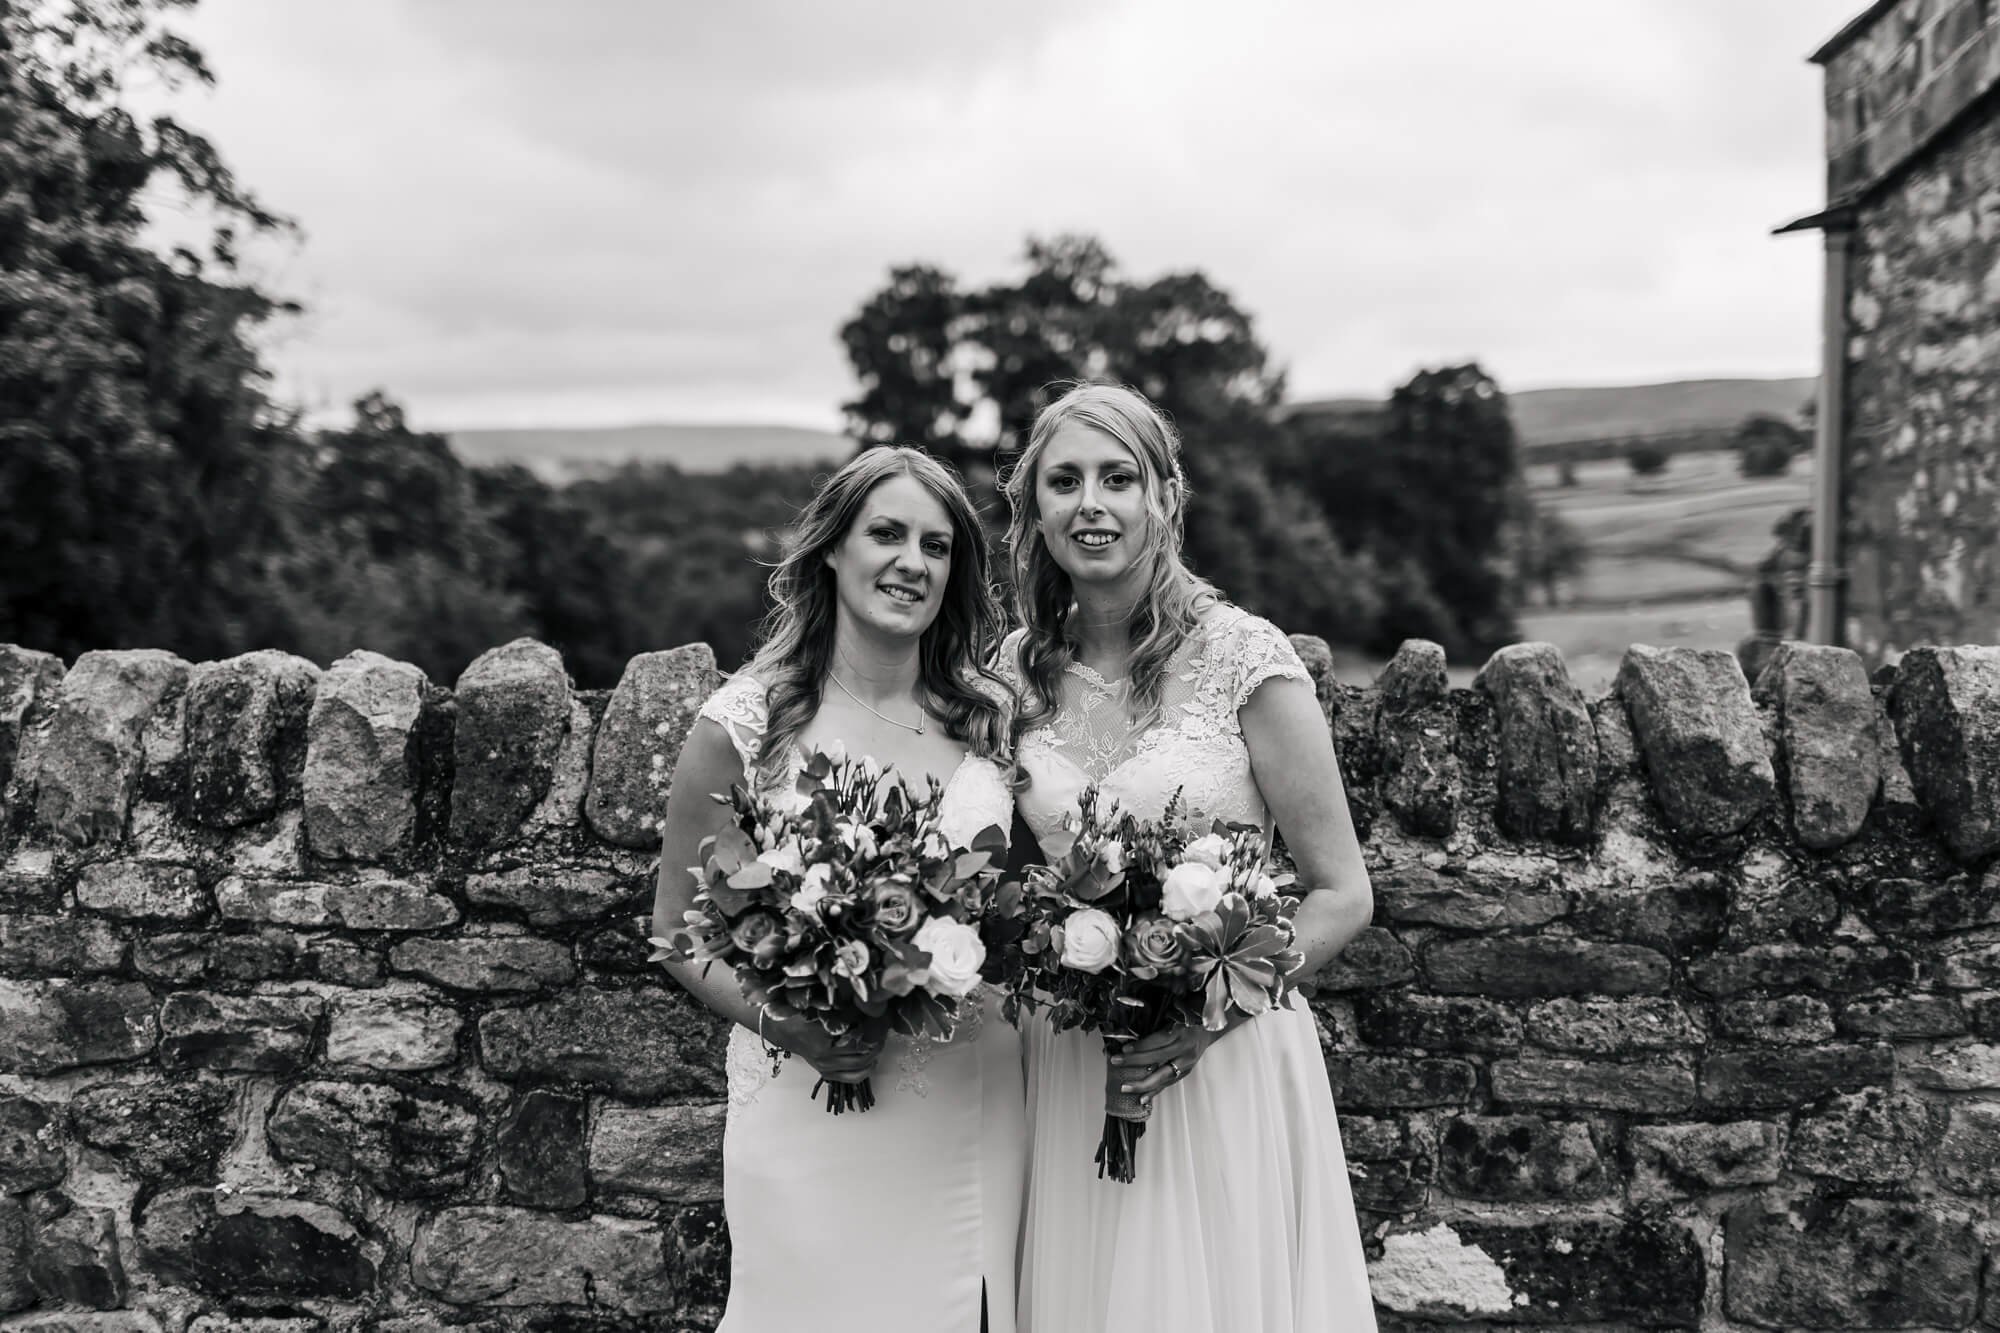 Portrait of the two brides on their wedding day